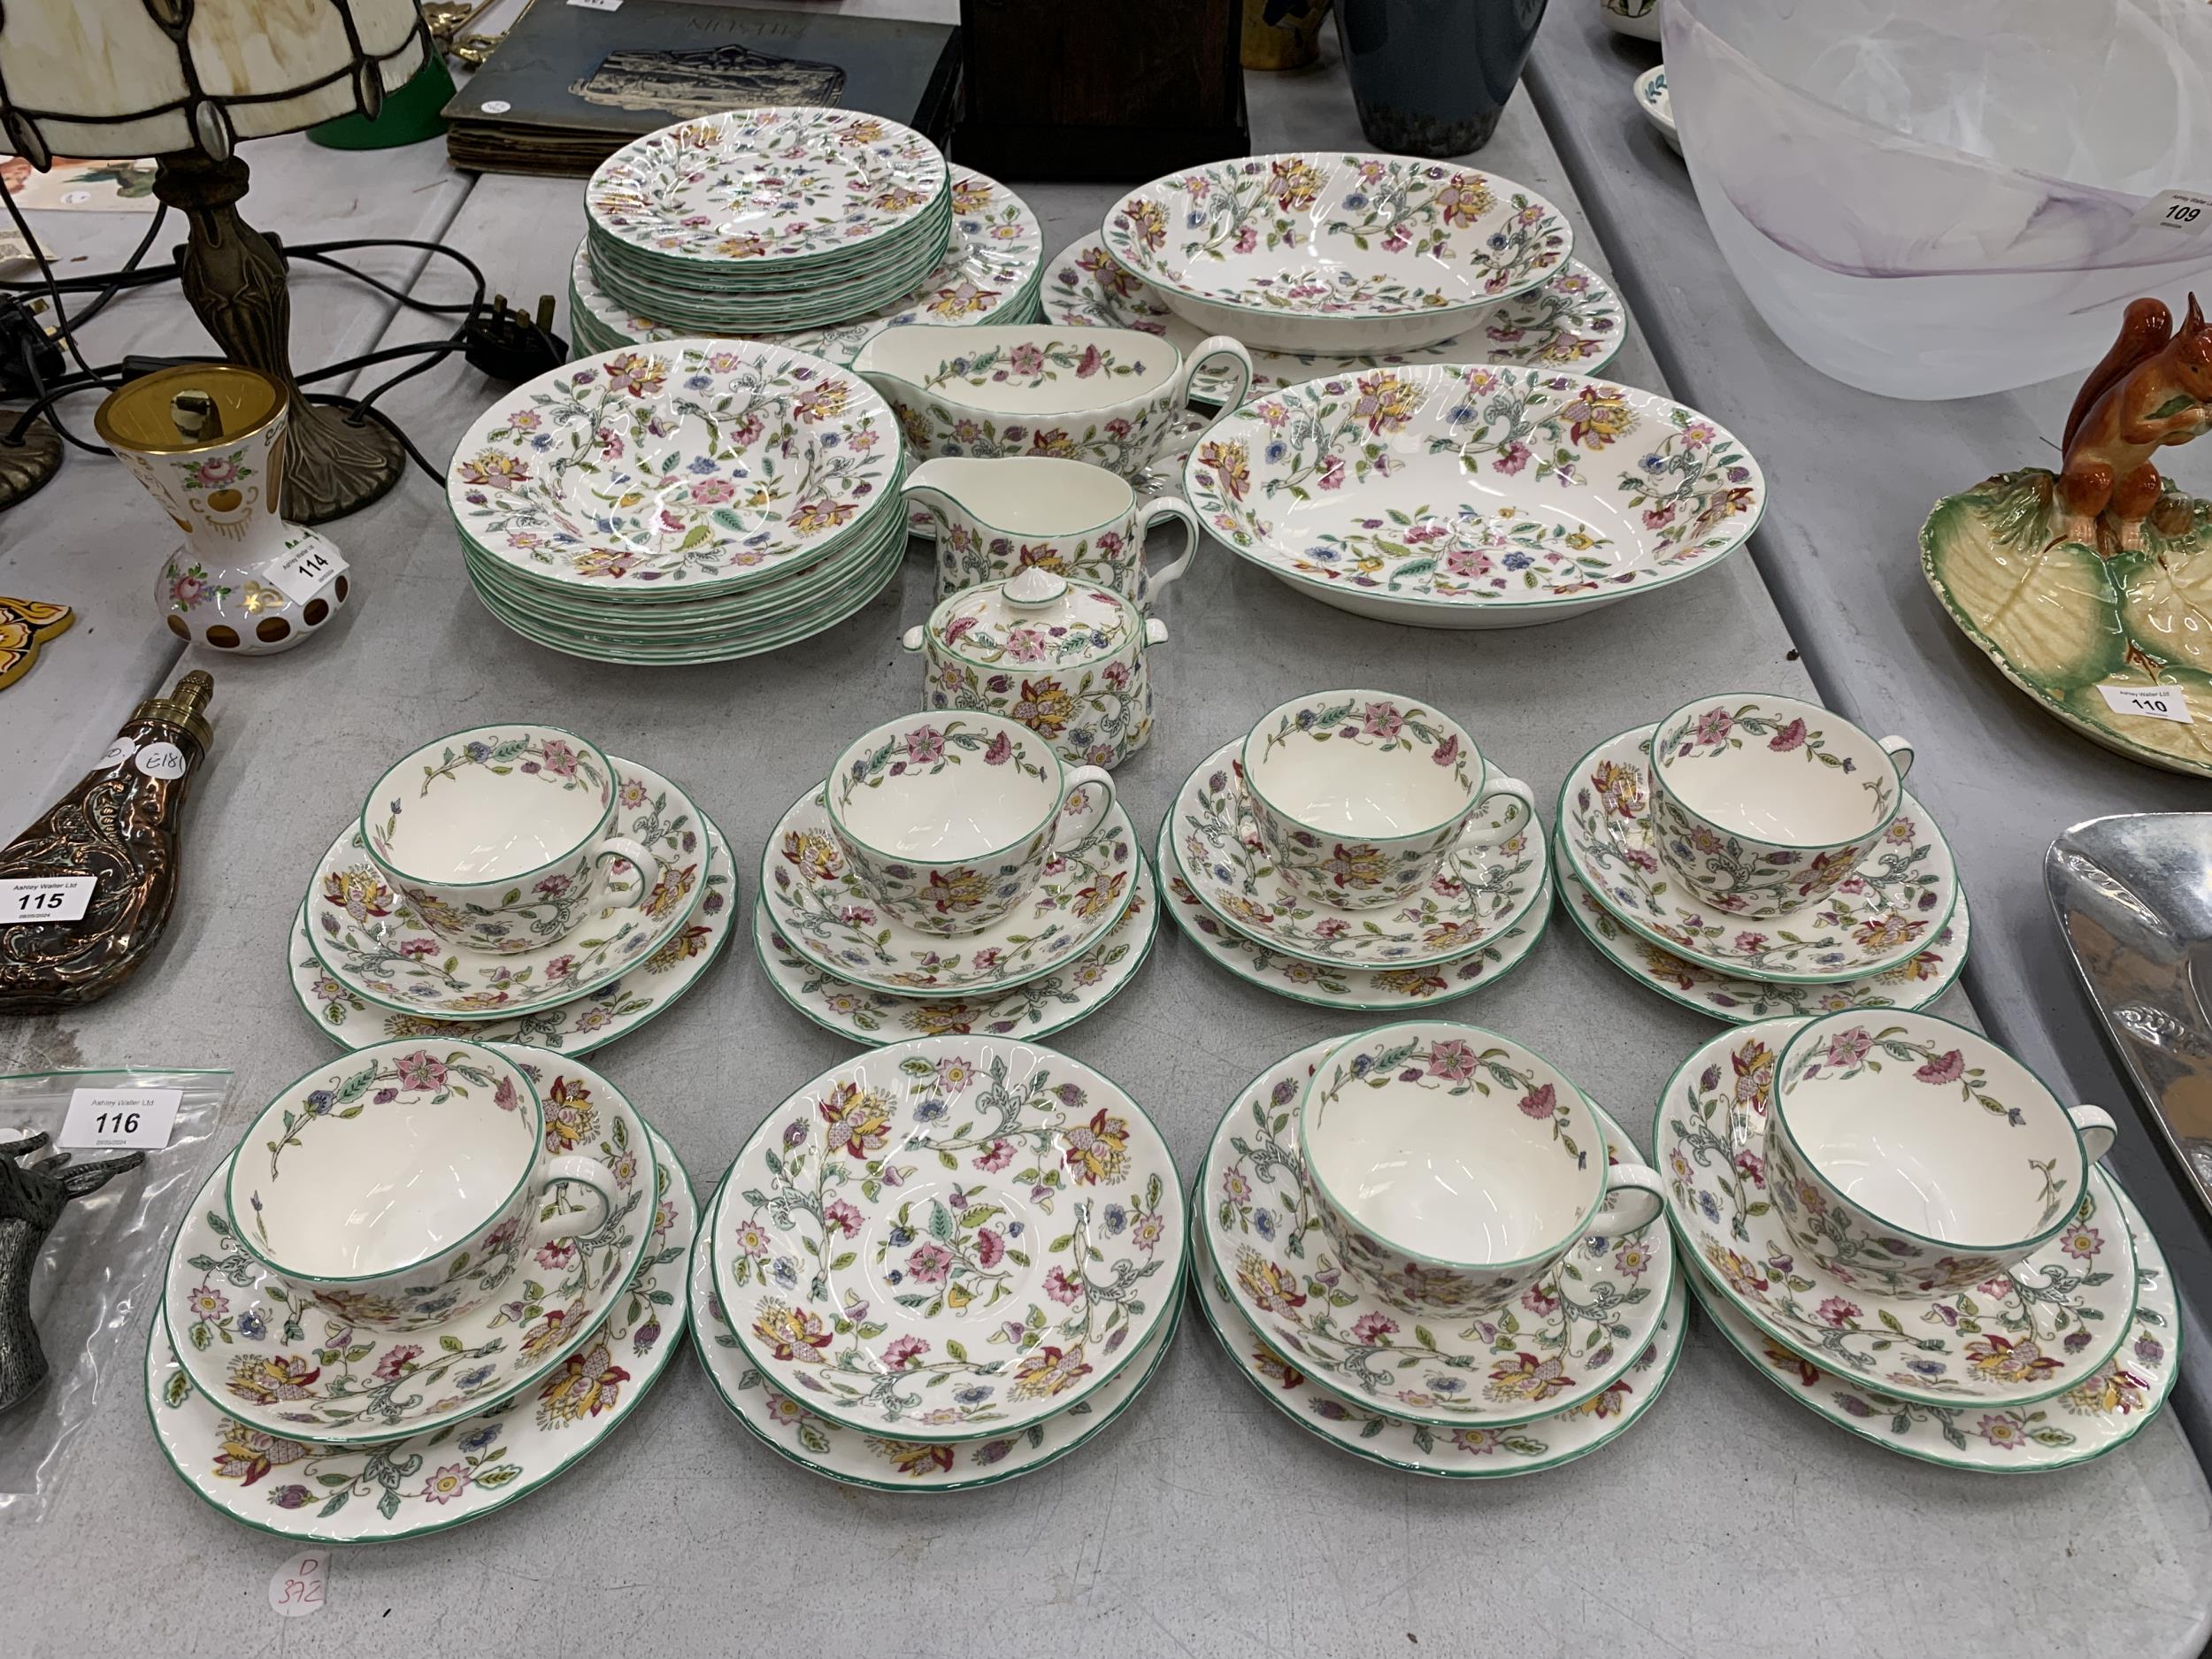 A LARGE QUANTITY OF MINTON HADDON HALL TO INCLUDE SERVING BOWLS, PLATTER, DINNER PLATES, SOUP BOWLS,